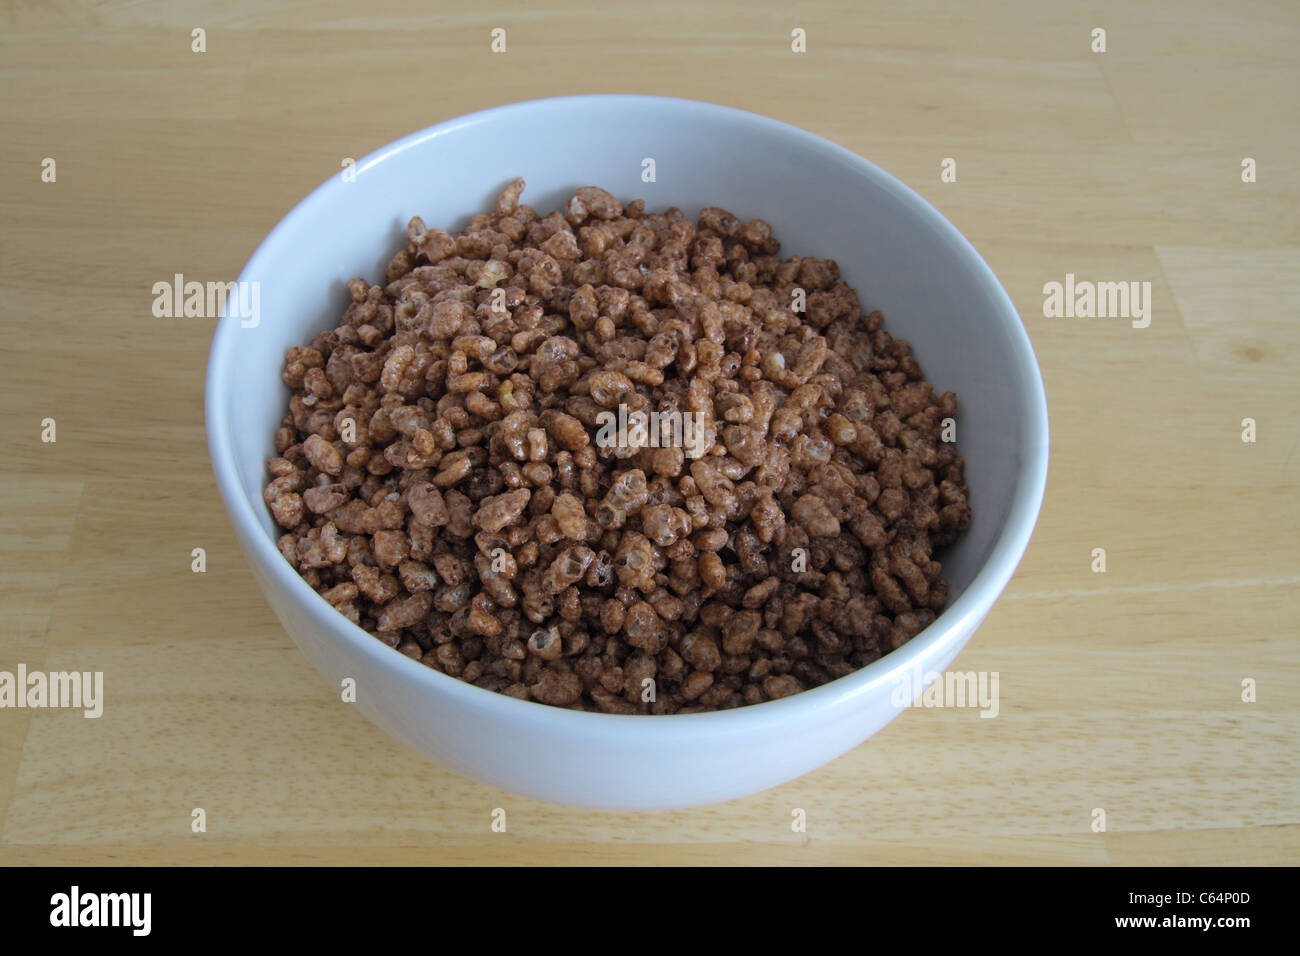 Close Up of a Bowl of Coco Pops Breakfast Cereal Stock Photo - Alamy